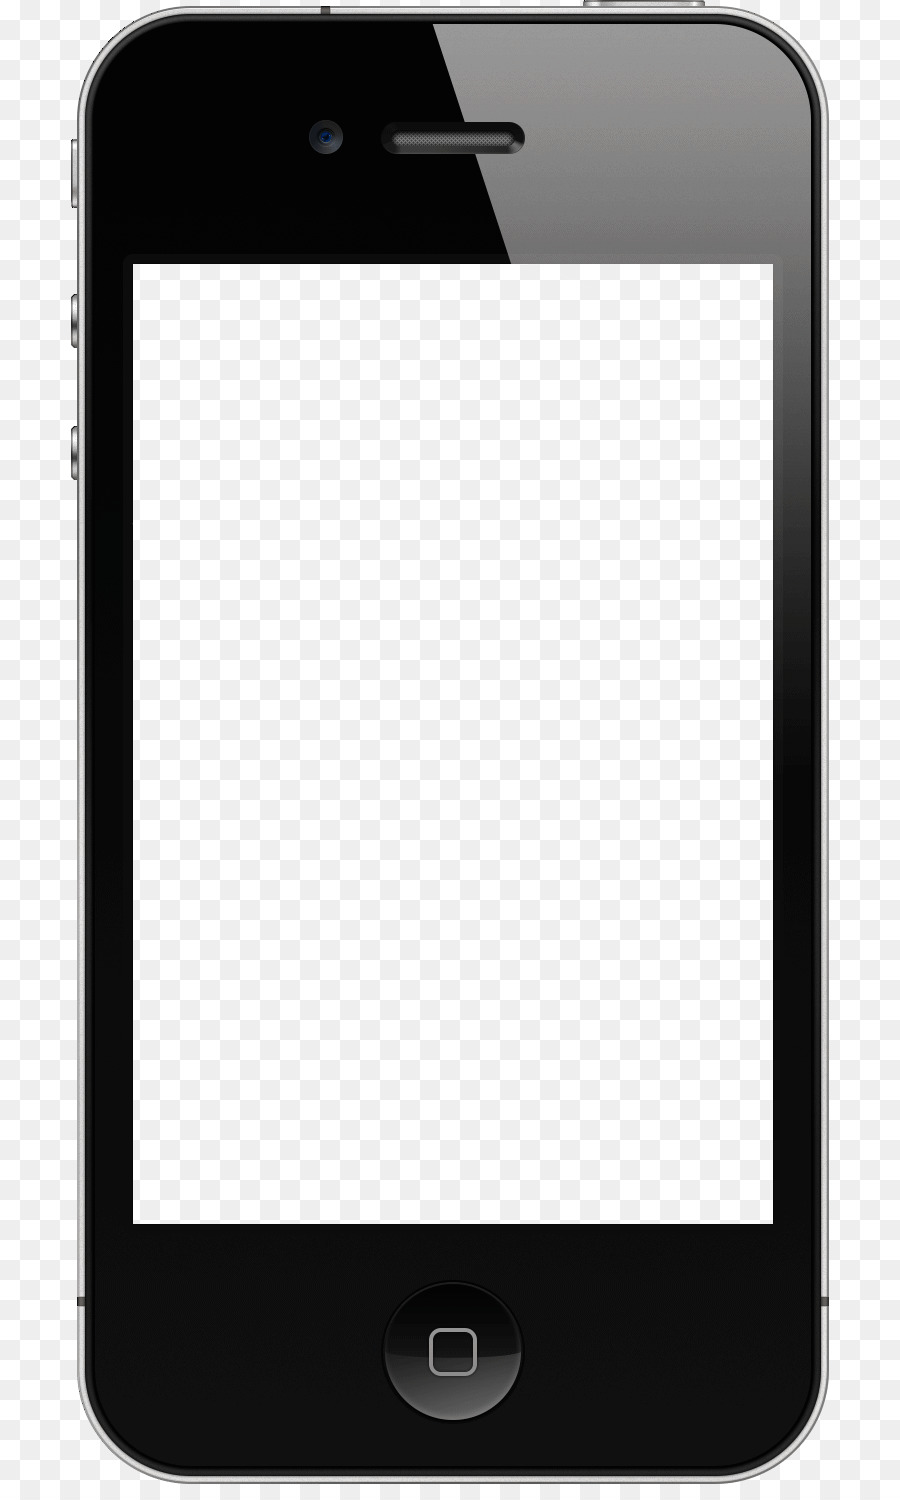 iphone wallpaper template,gadget,mobile phone,communication device,portable communications device,technology